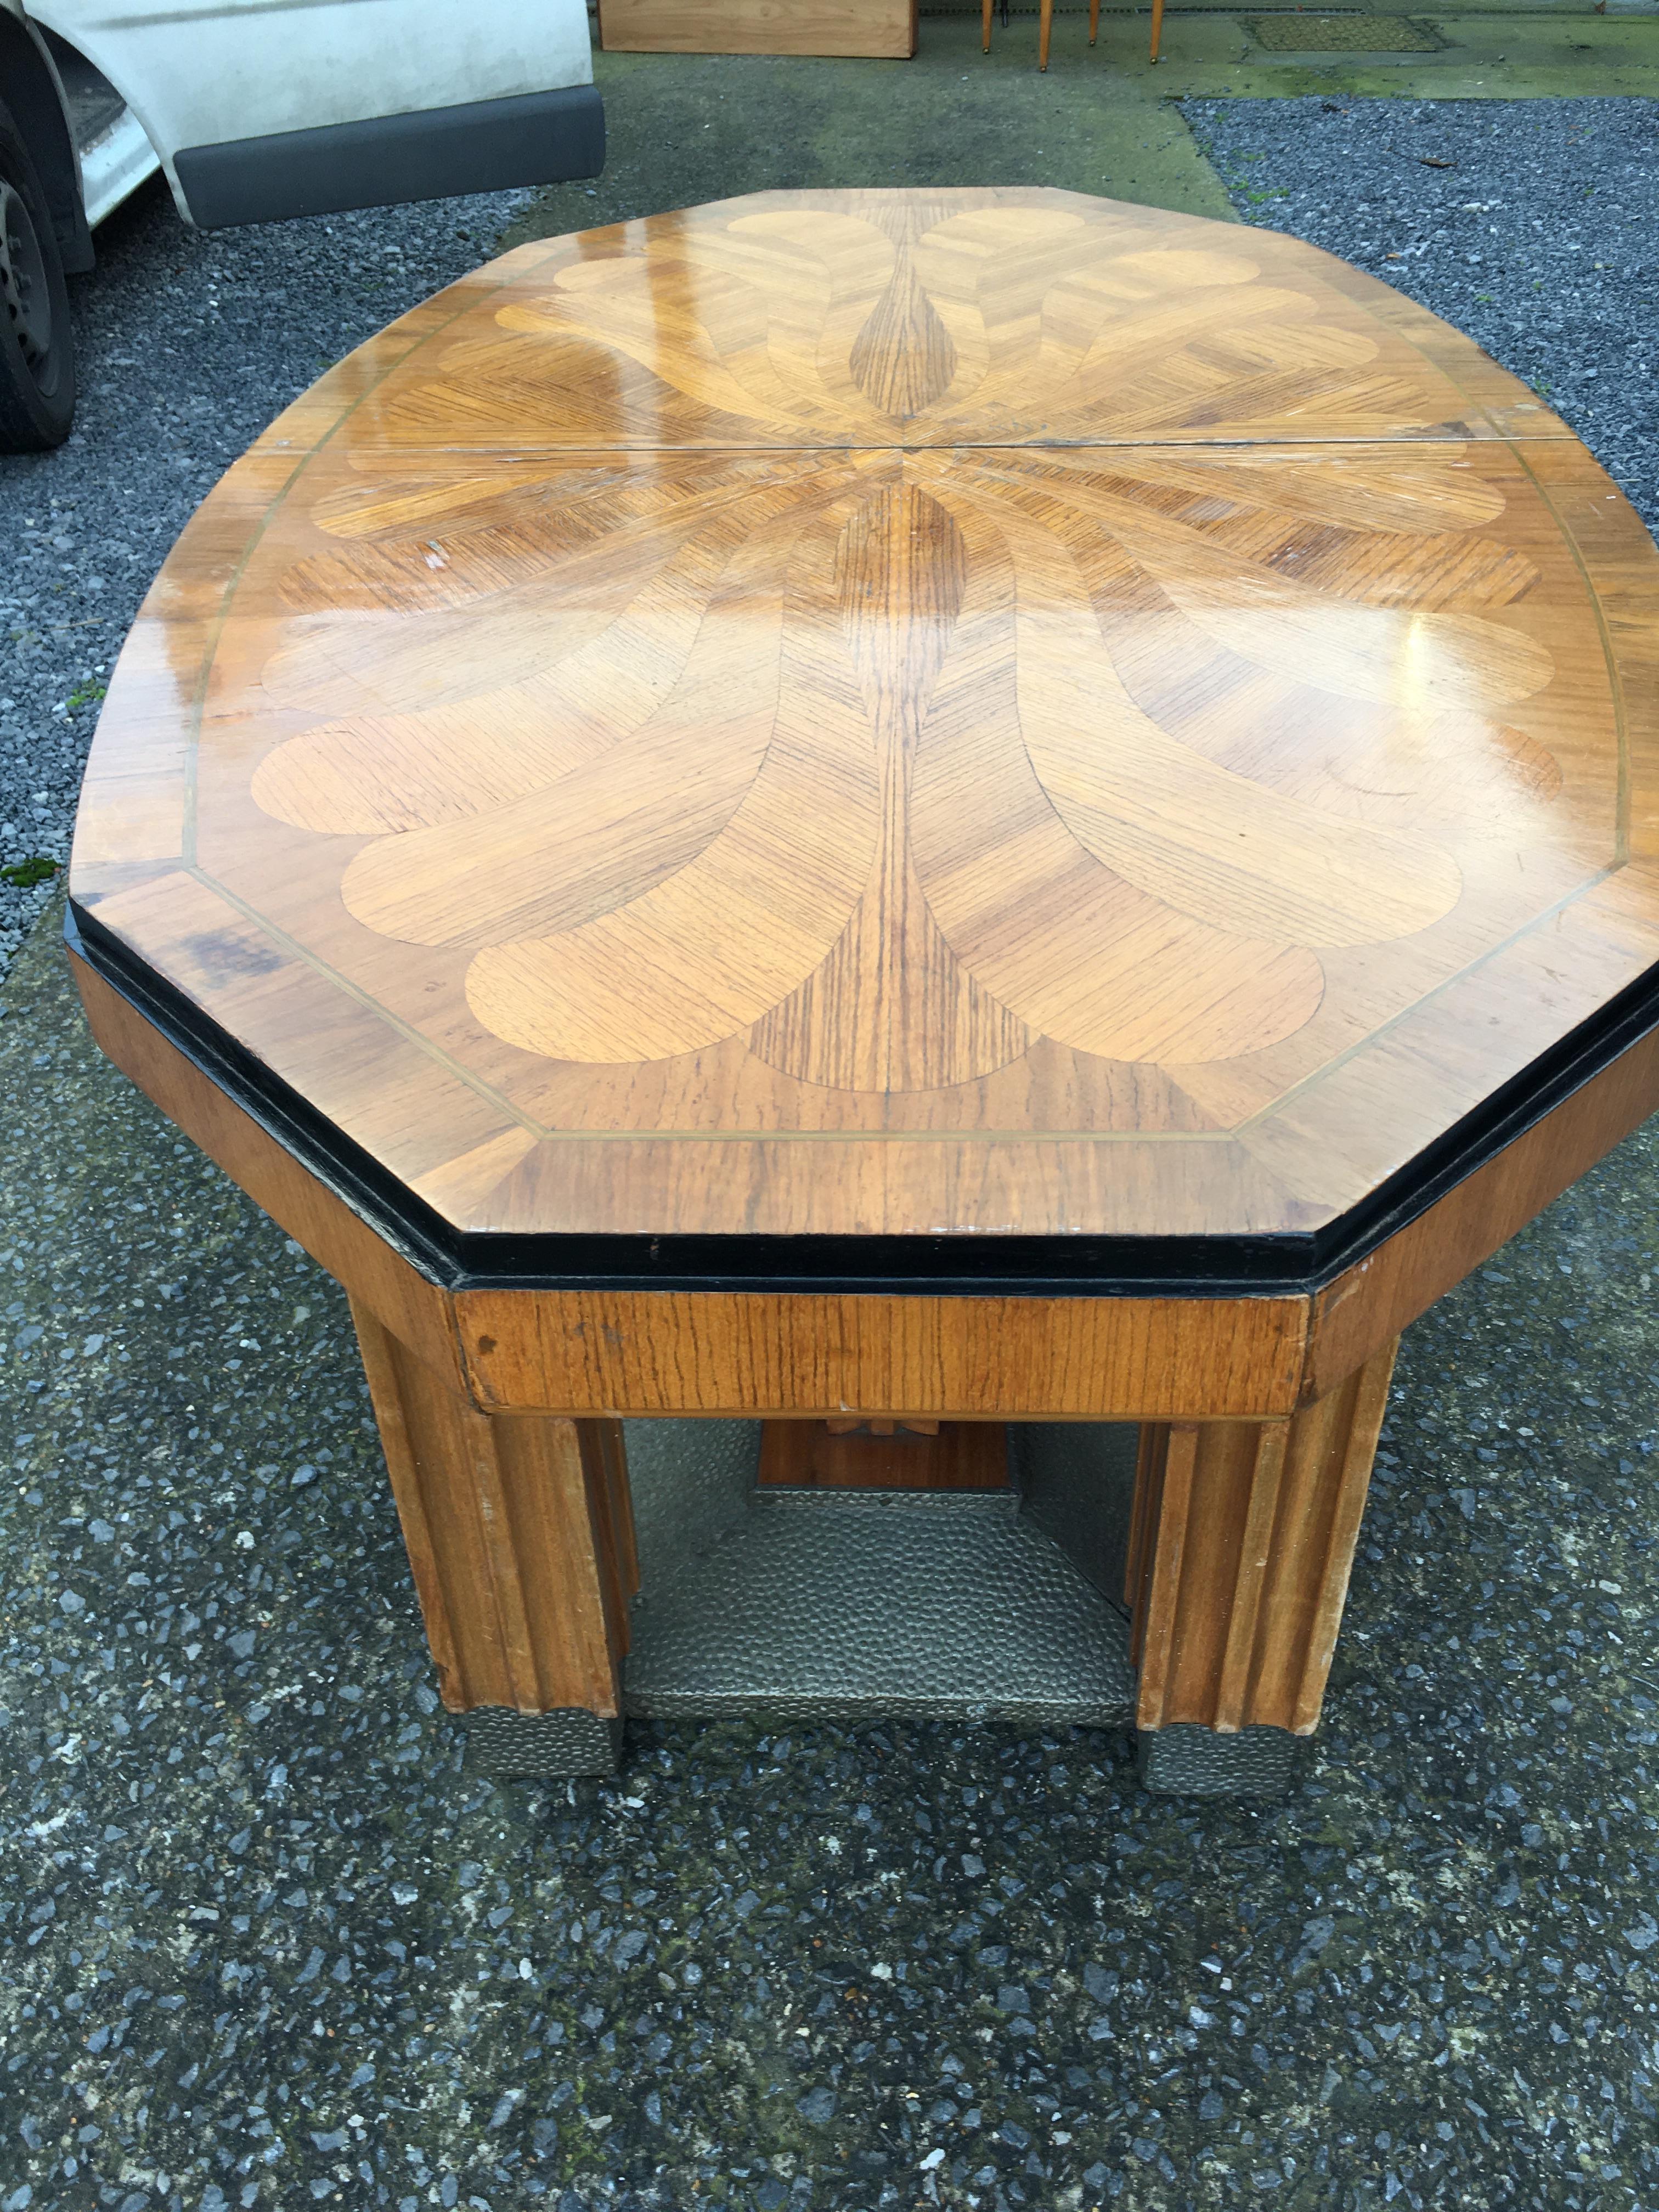 Large Art Deco Dining Table with Marquetry Design on the Top, circa 1925-1930 For Sale 4